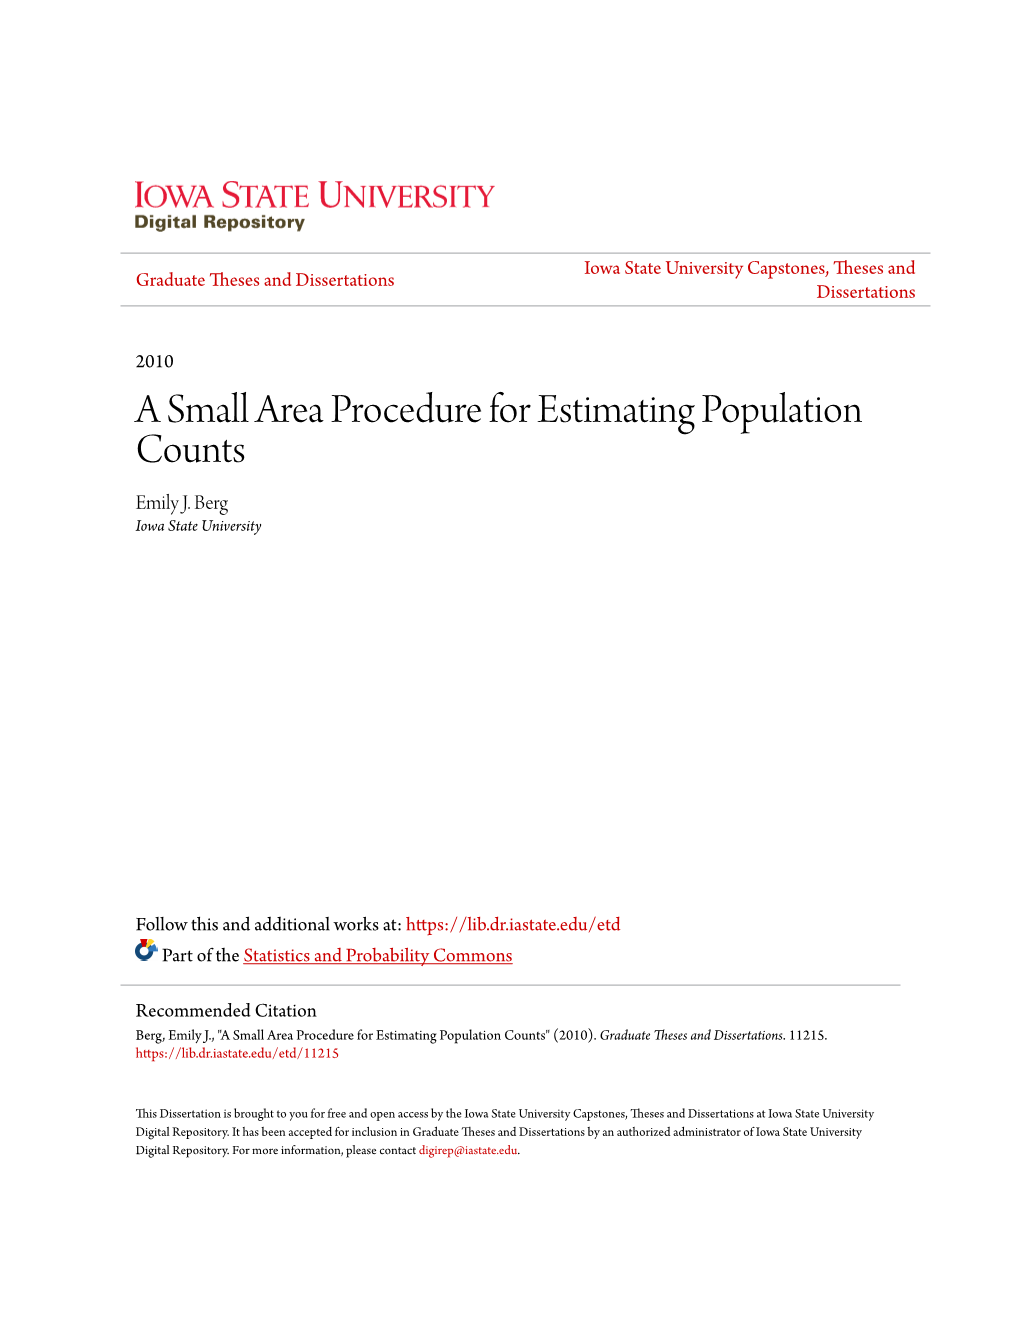 A Small Area Procedure for Estimating Population Counts Emily J